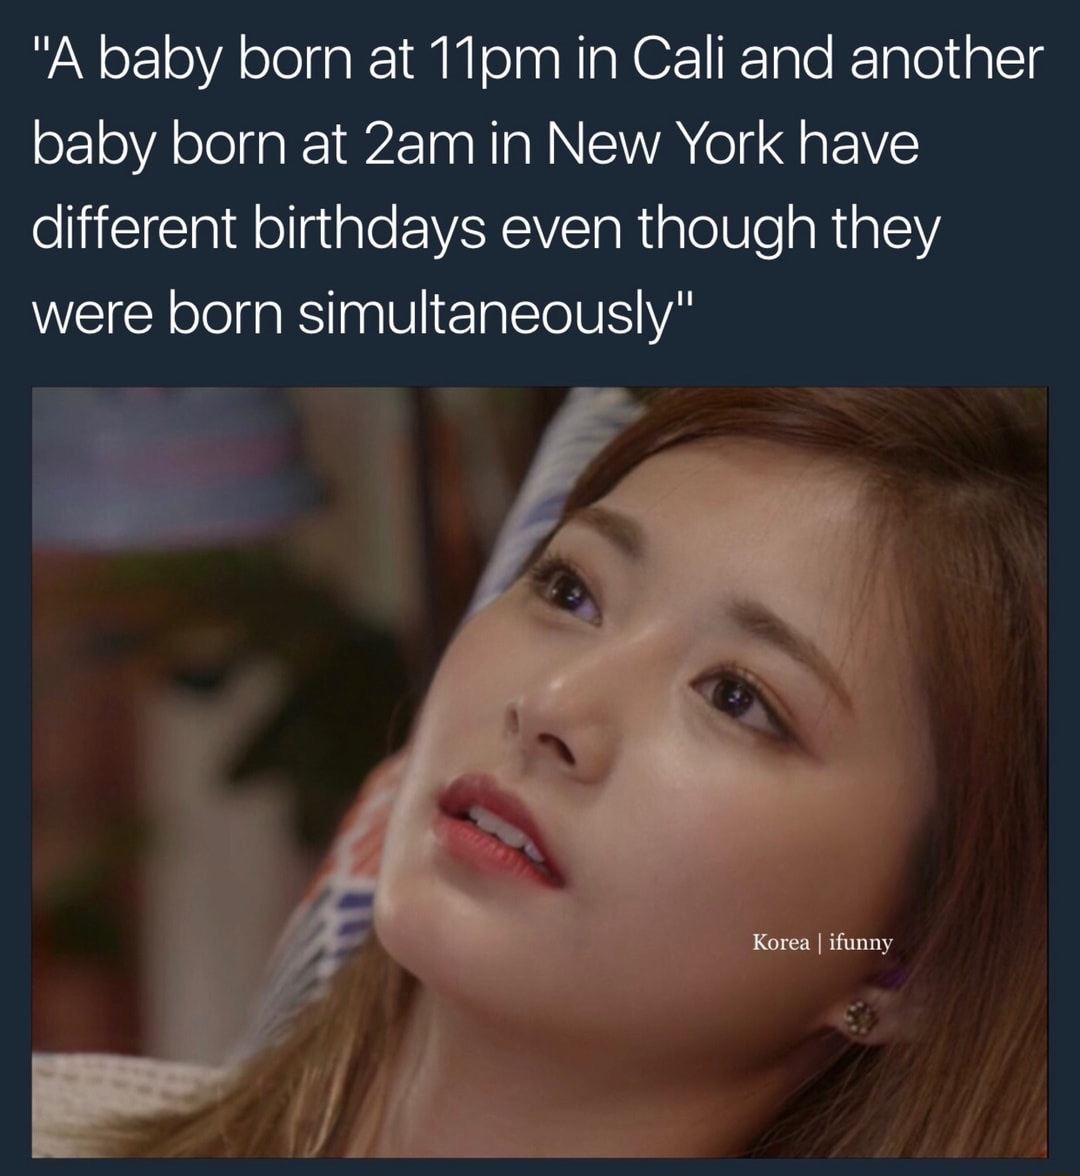 Lost in thought Korean girl in deep thought about how kids born 3 hours apart can actually be born simultaneously if they are in different time zones